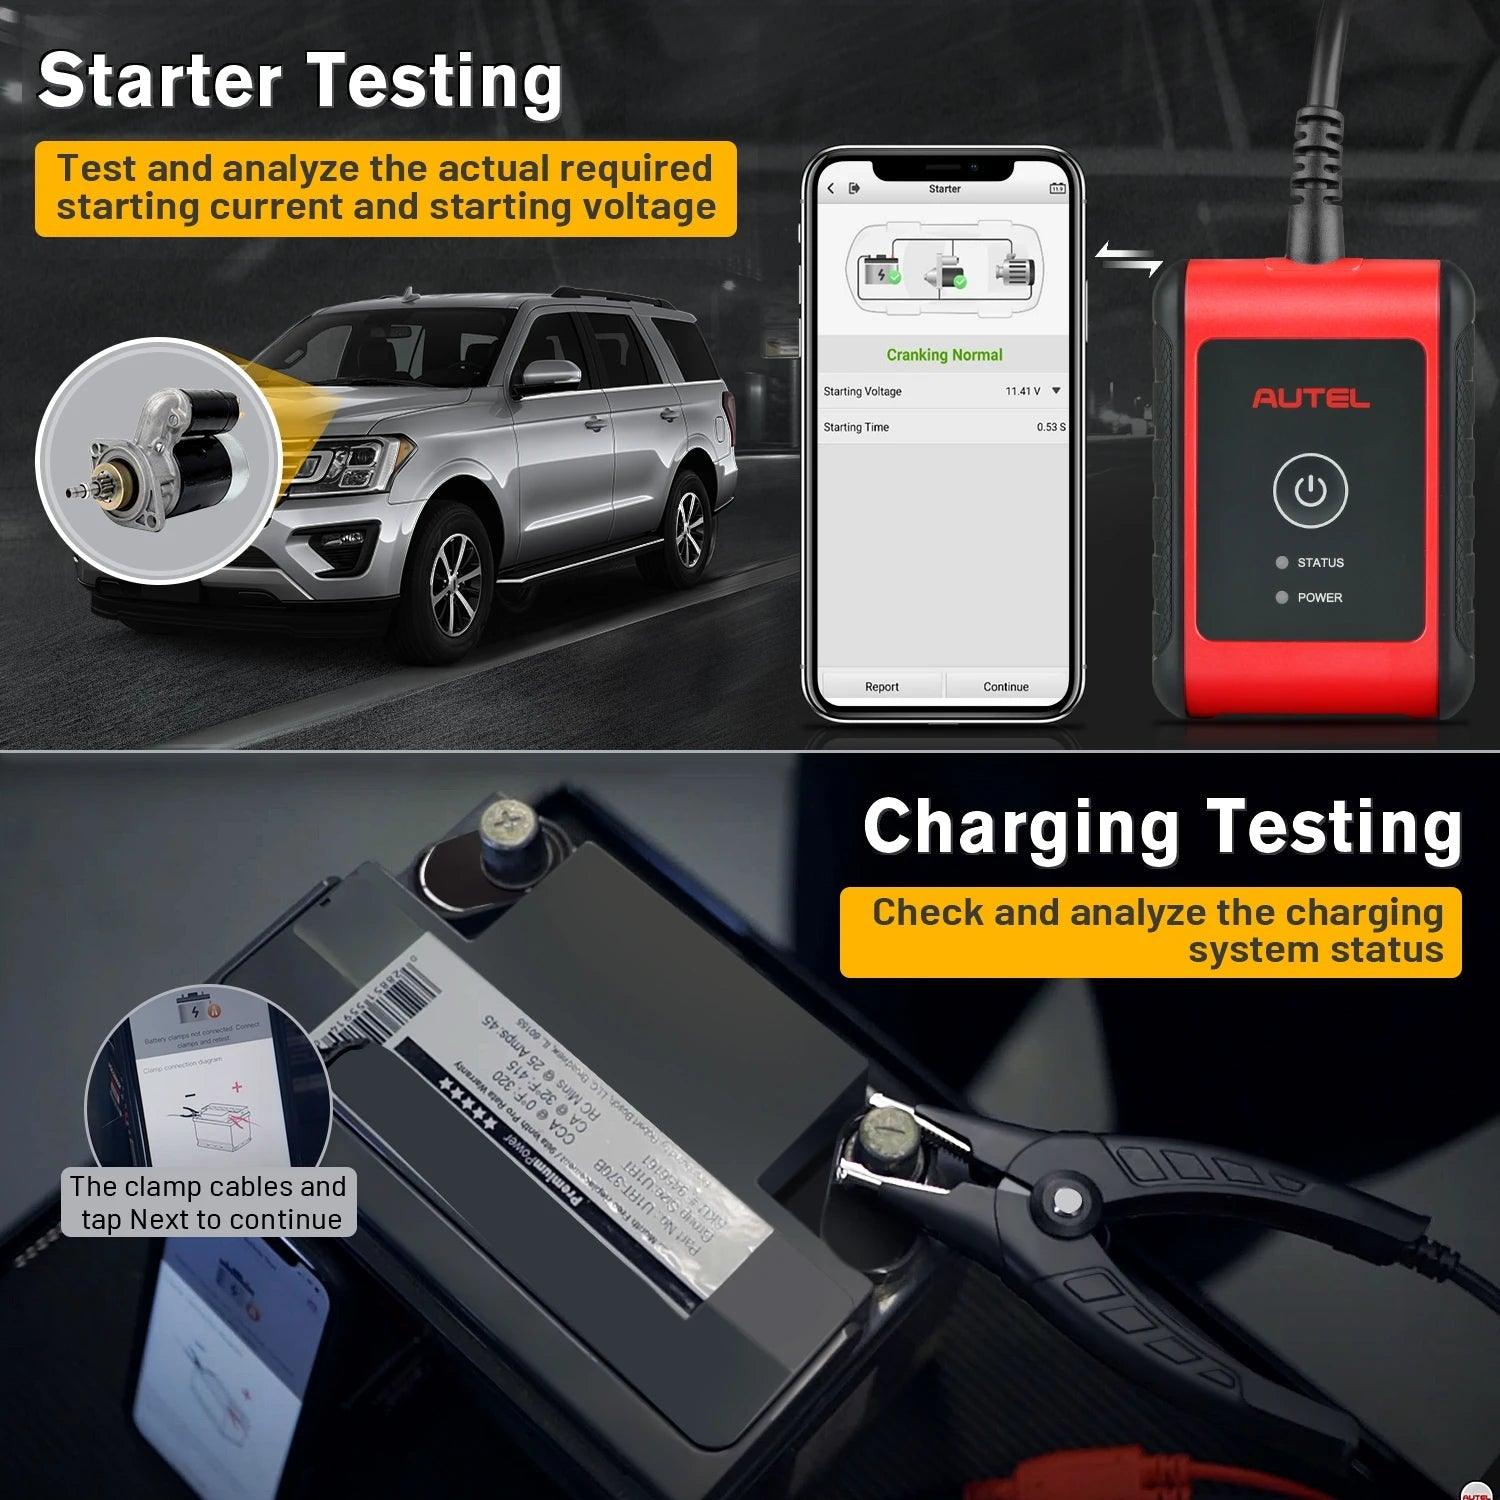 Autel MaxiBAS BT506 Auto Battery Tester Car Battery & Electrical System Analysis Tester For IOS & Android 6-12V 100-2000CCA - Dynamex